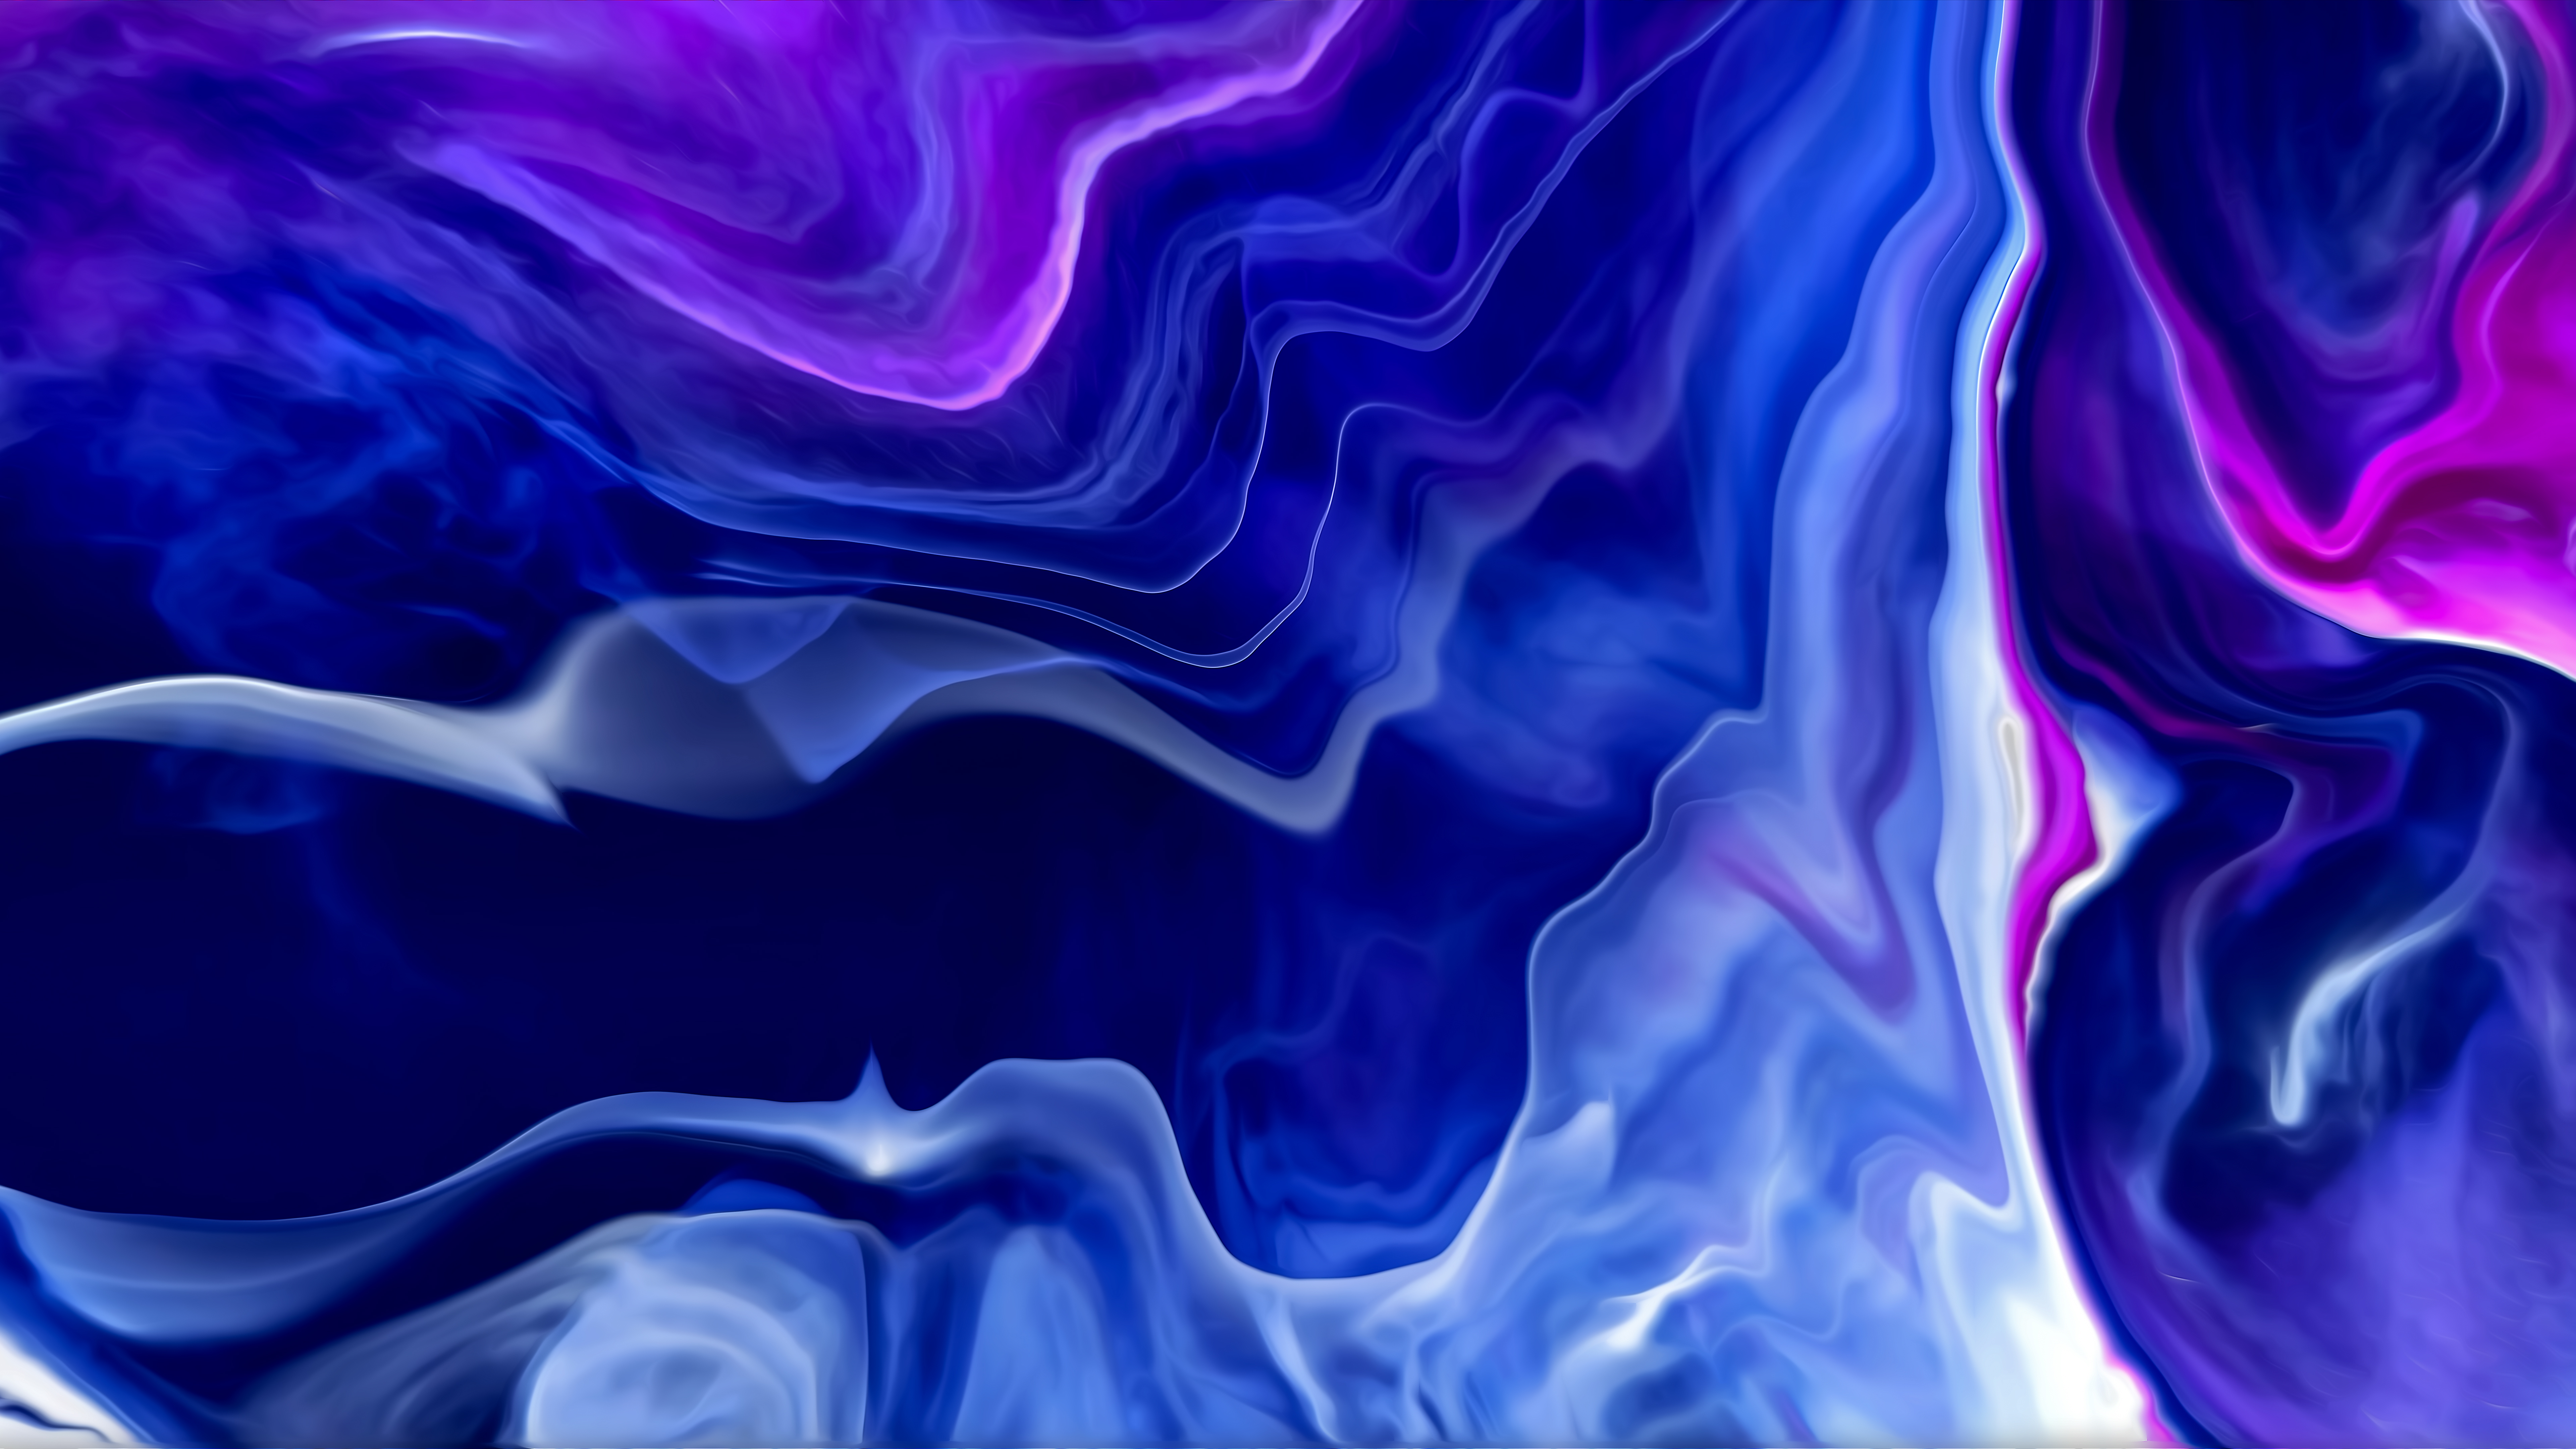 gas flow abstract 4k 1603390998 - Gas Flow Abstract 4k - Gas Flow Abstract 4k wallpapers